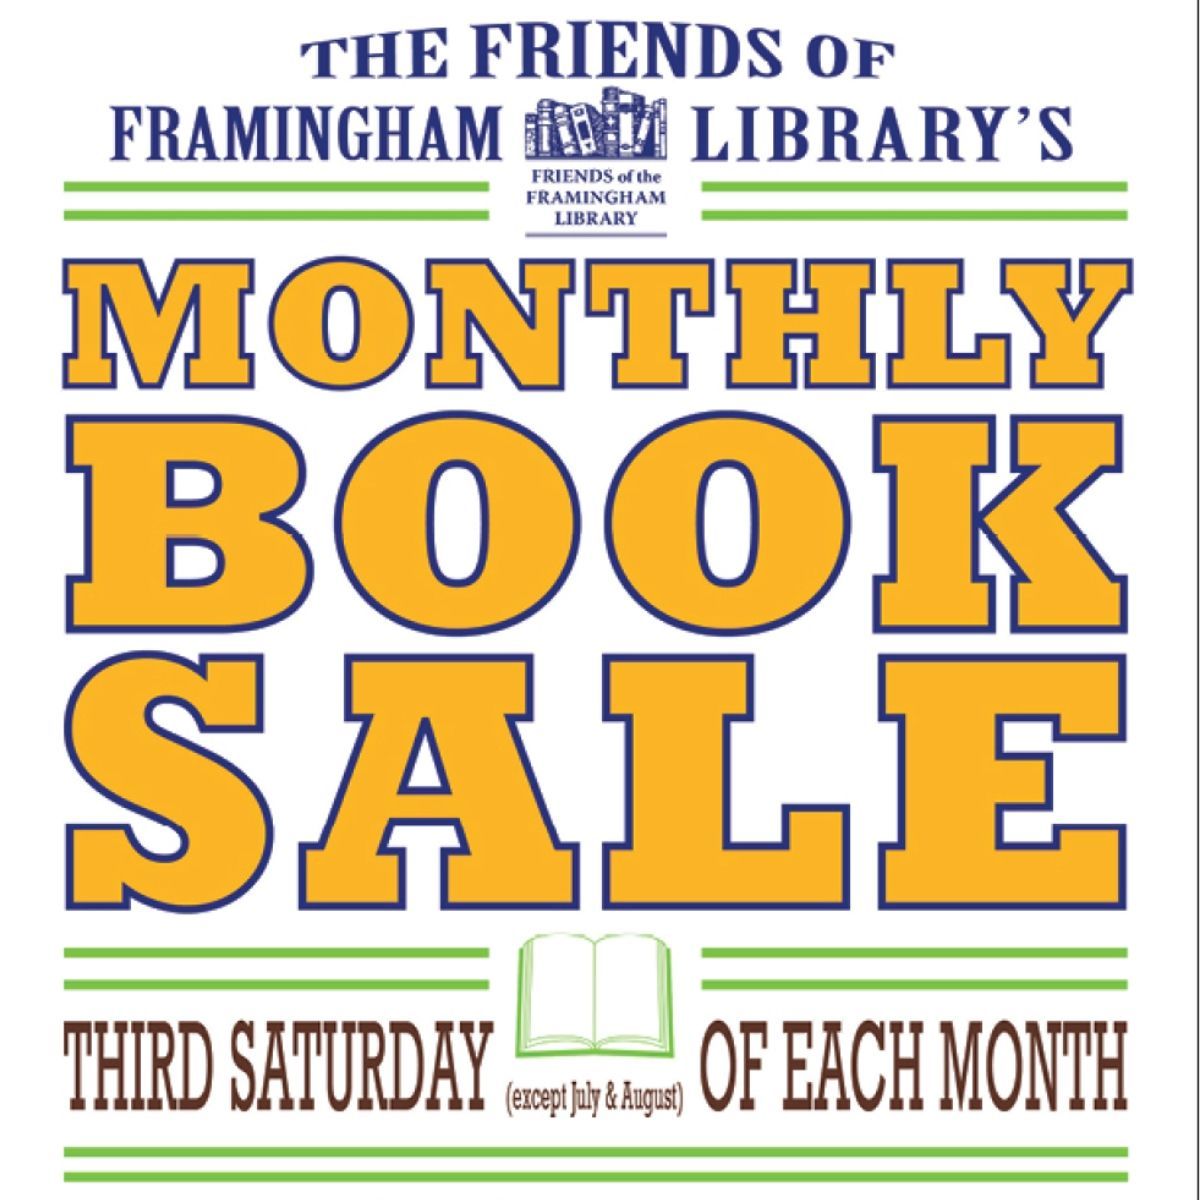 The Friends of Framingham Library’s Monthly Book Sale
Saturday April 20, 10am-3pm
Main Library

#CityOfFramingham #FraminghamPublicLibrary #FraminghamLibrary #FPLReads #BookSale #FriendsOfTheFraminghamLibrary